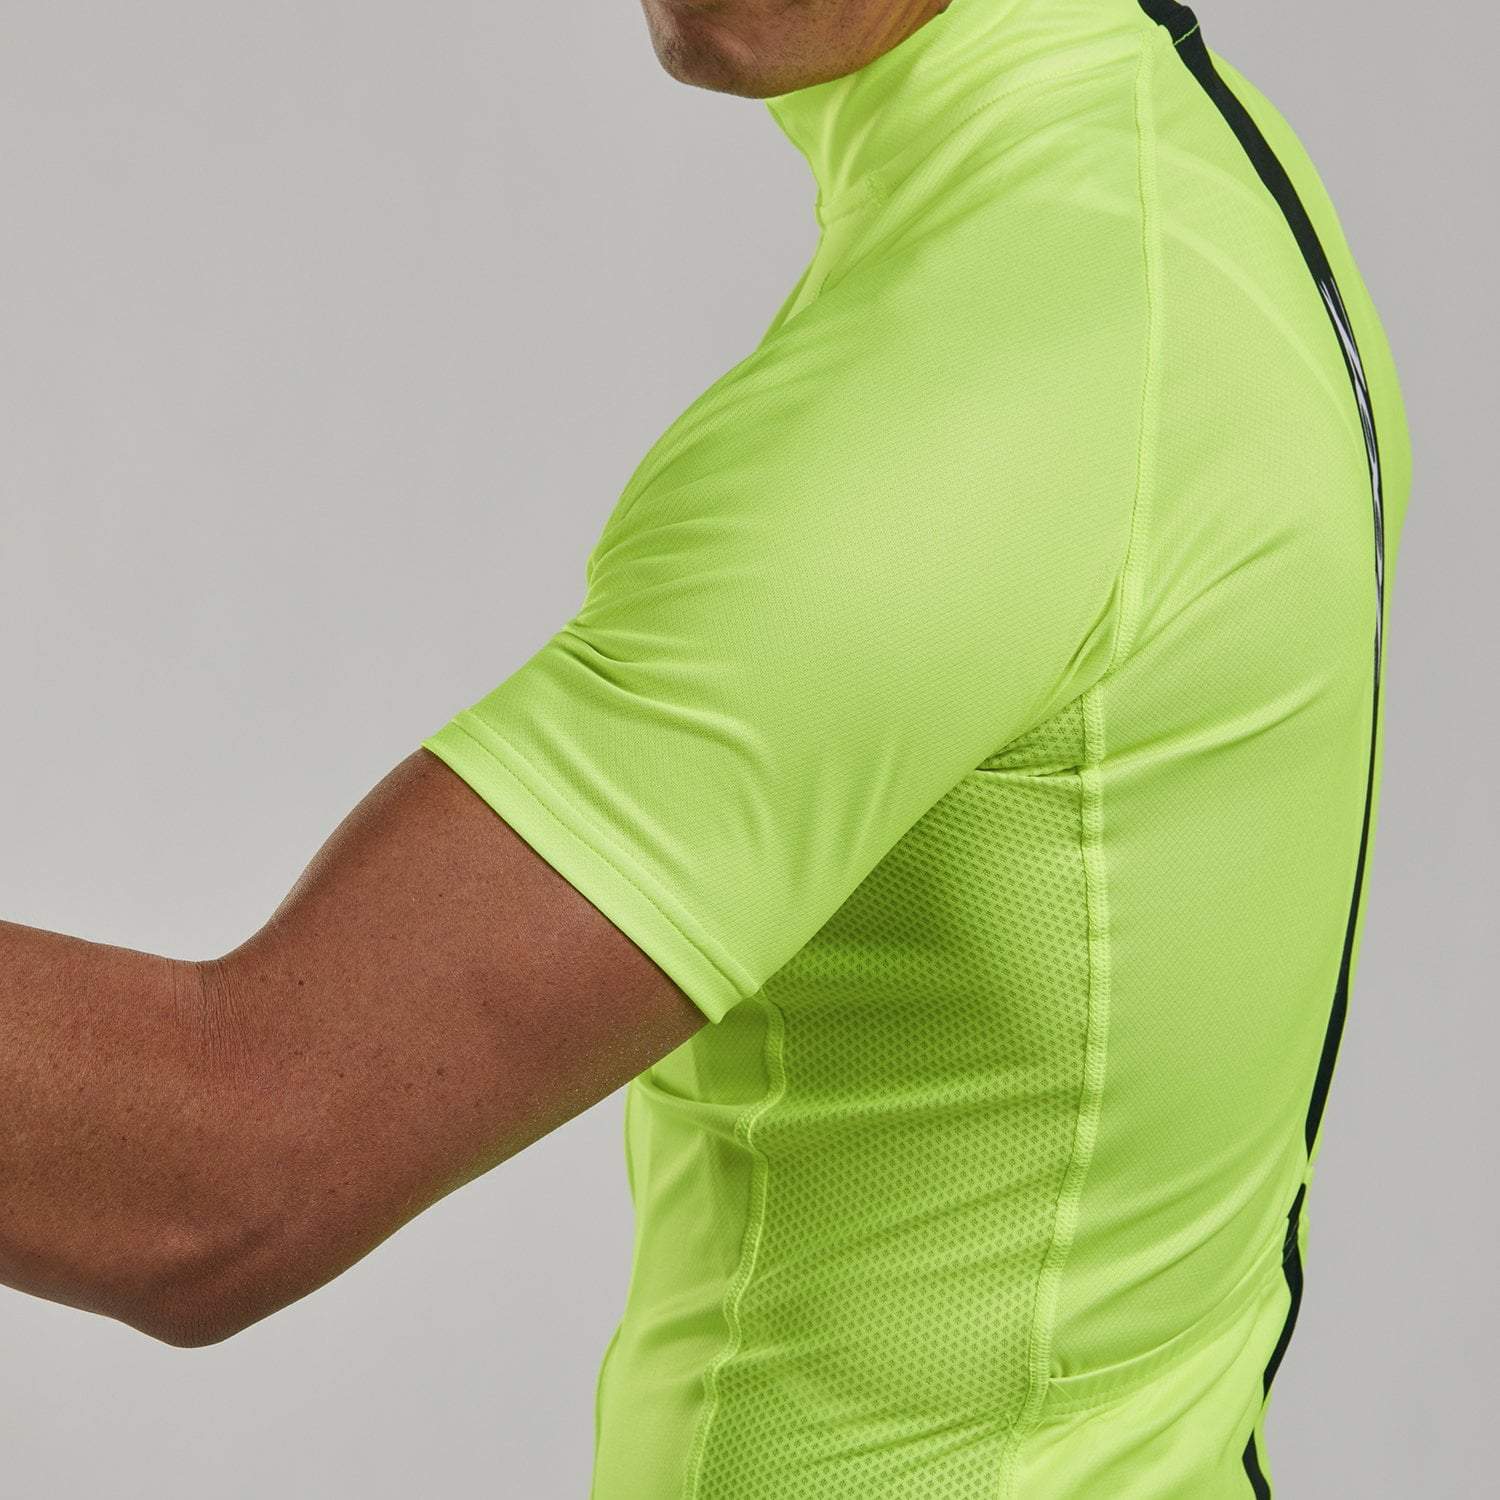 Zoot Sports CYCLE APPAREL MENS CORE + CYCLE JERSEY - SAFETY YELLOW